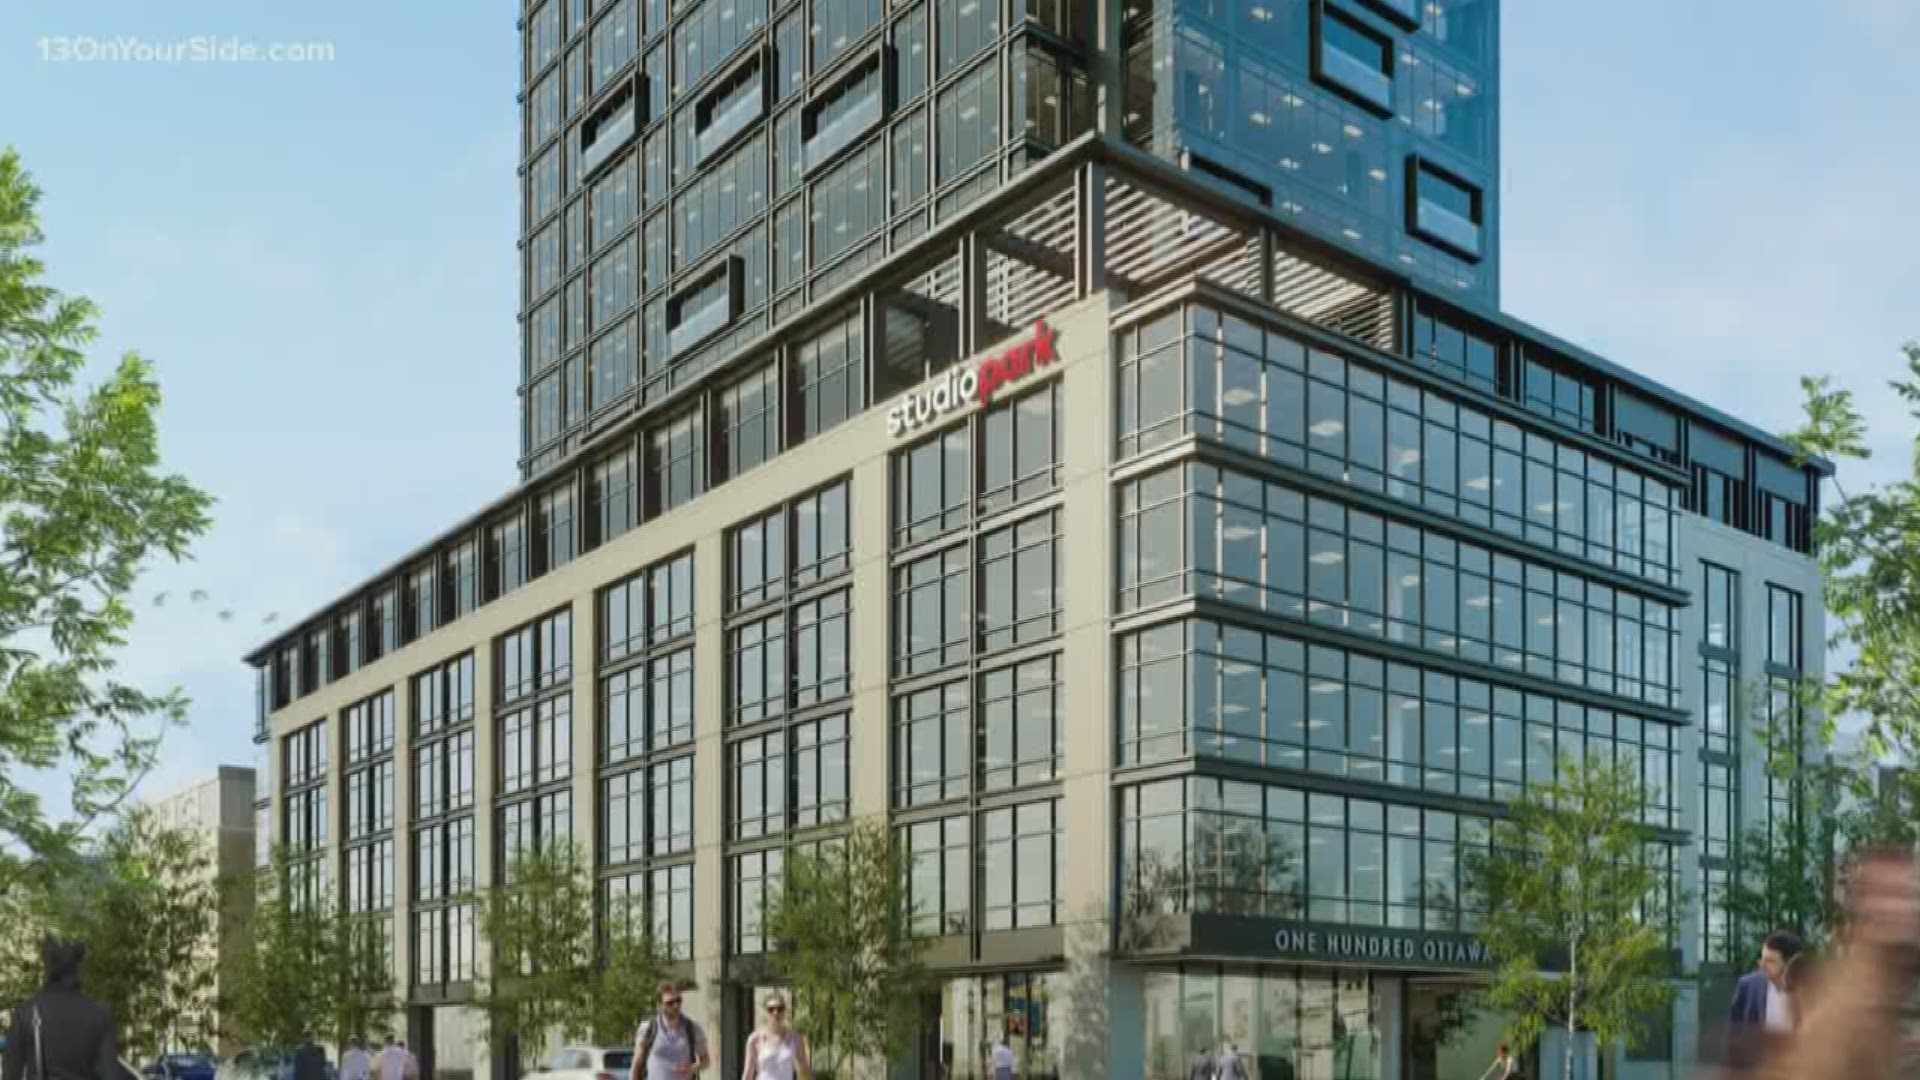 Acrisure, a top 10 global insurance broker, will be moving its headquarters to Studio Park, bringing with it 400 new jobs to the heart of Grand Rapids.